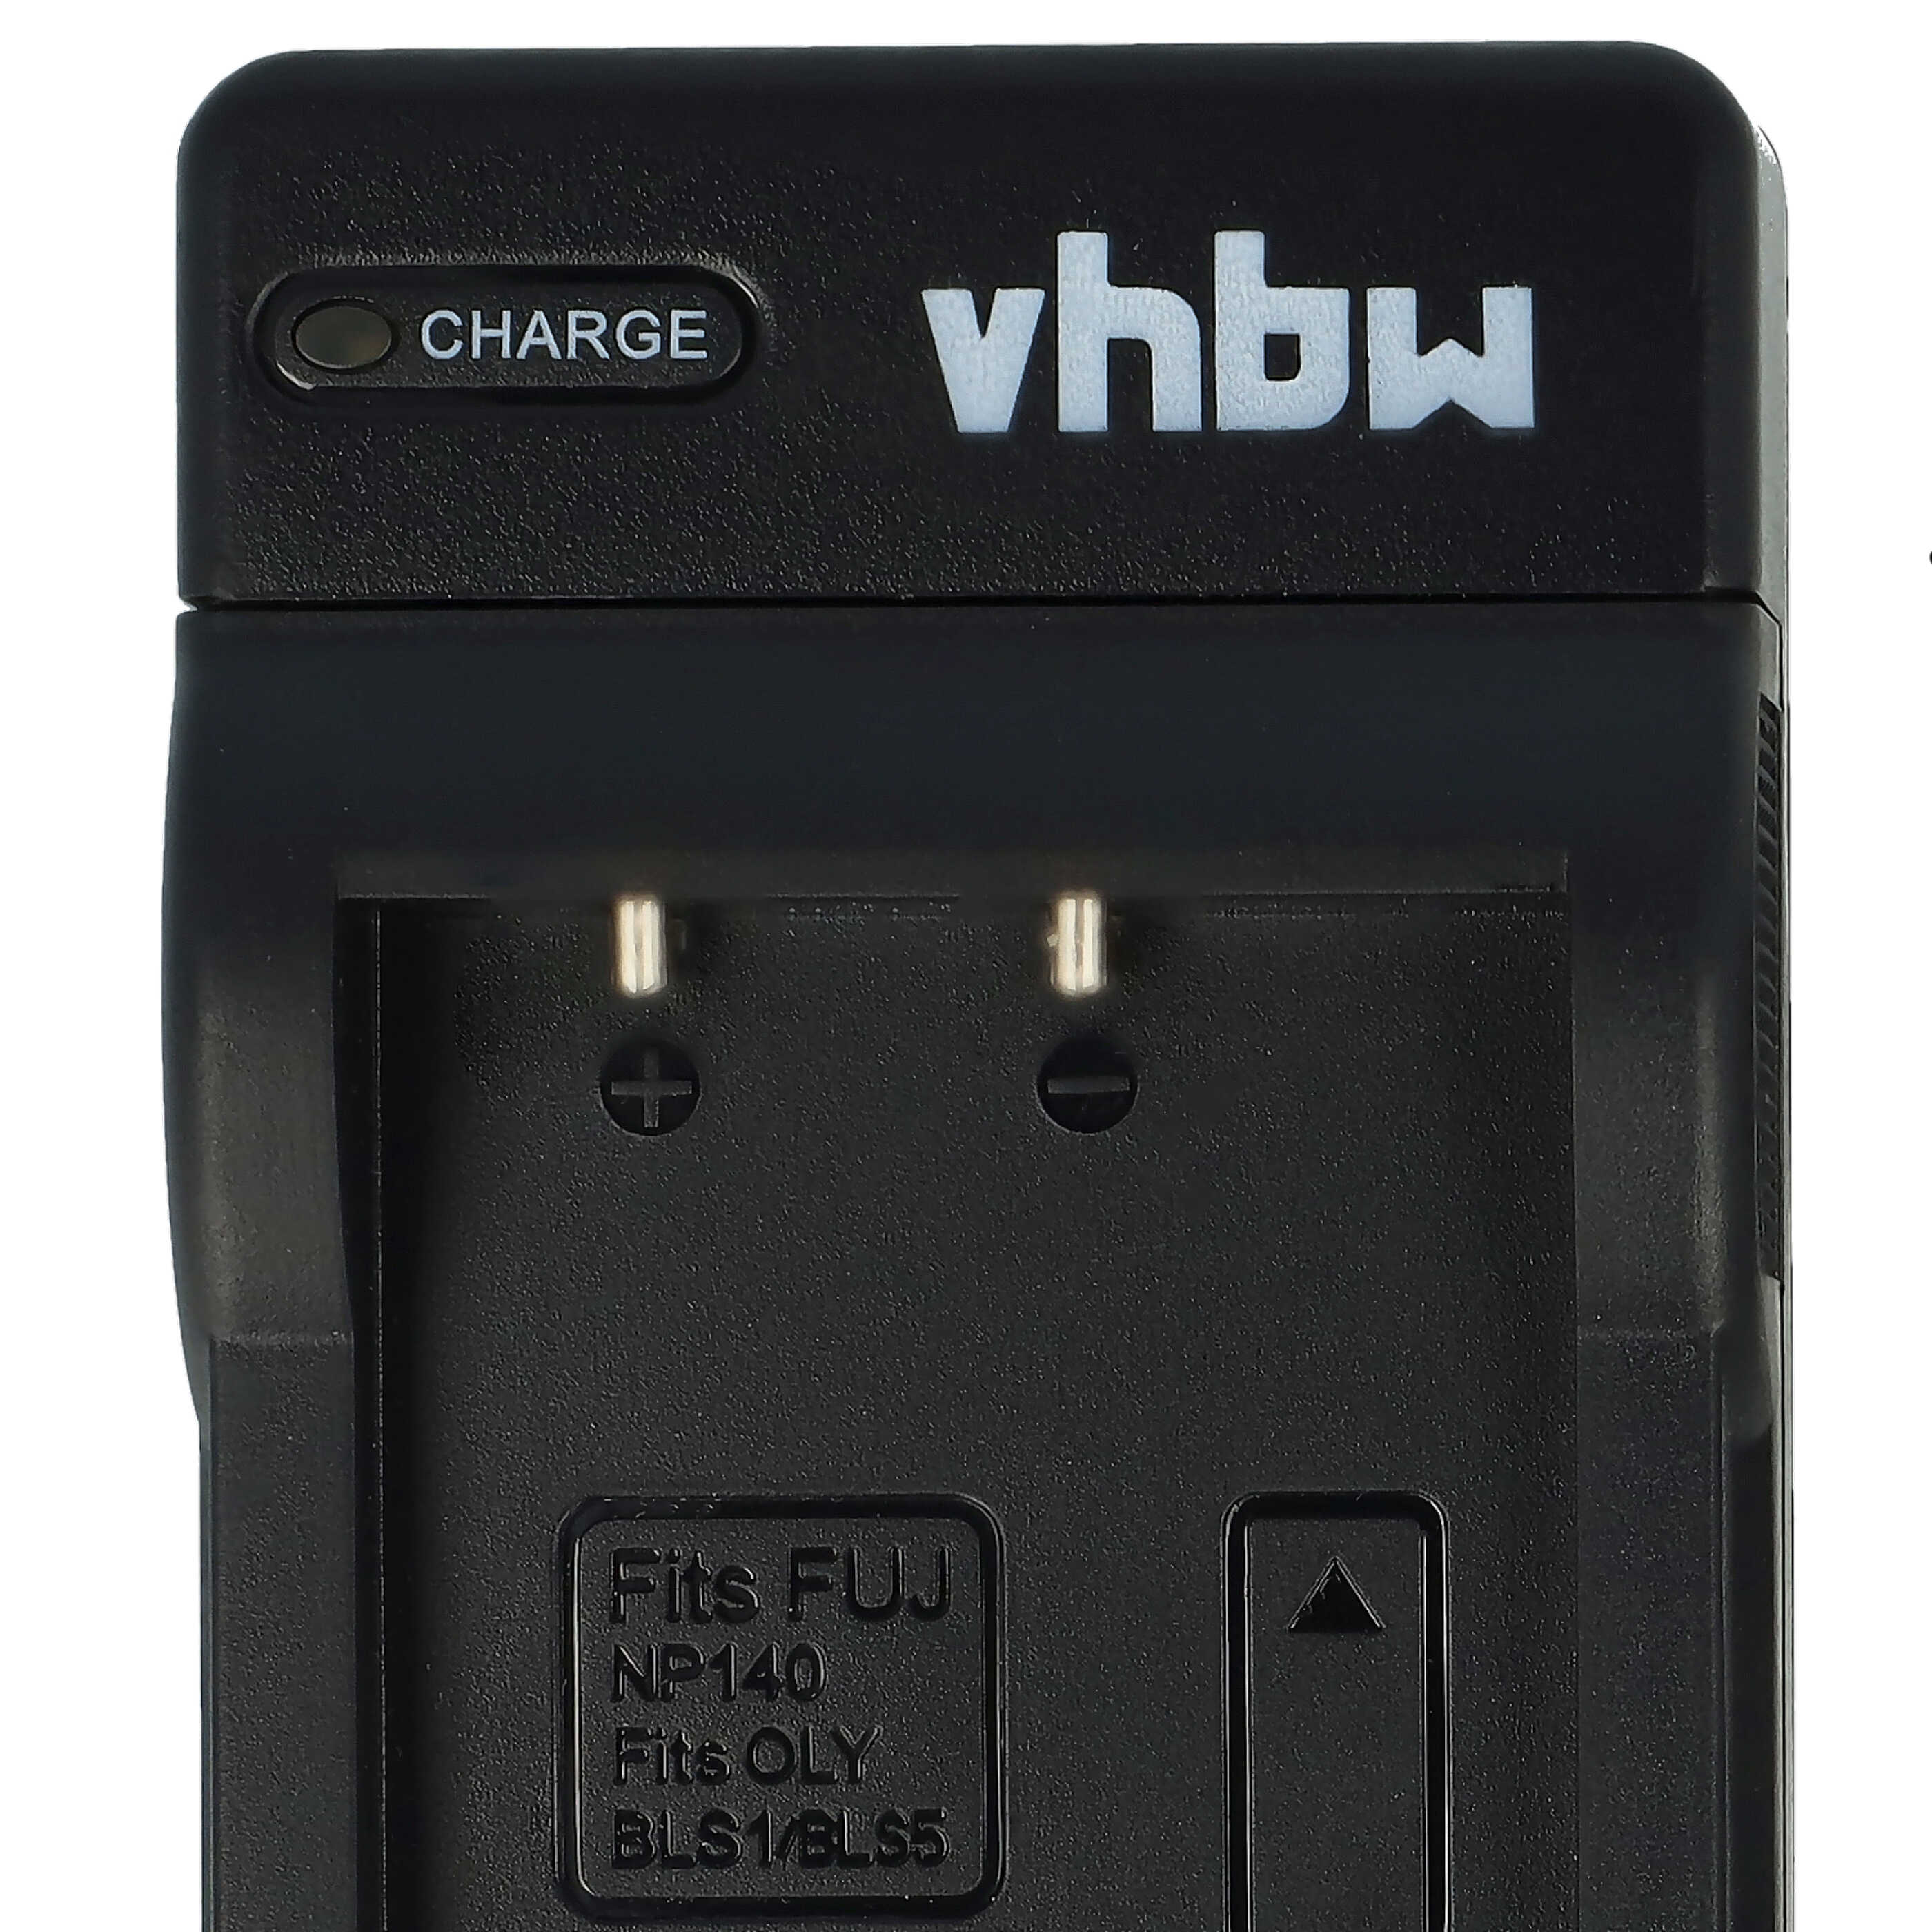 Battery Charger suitable for FinePix S100 Camera etc. - 0.5 A, 8.4 V